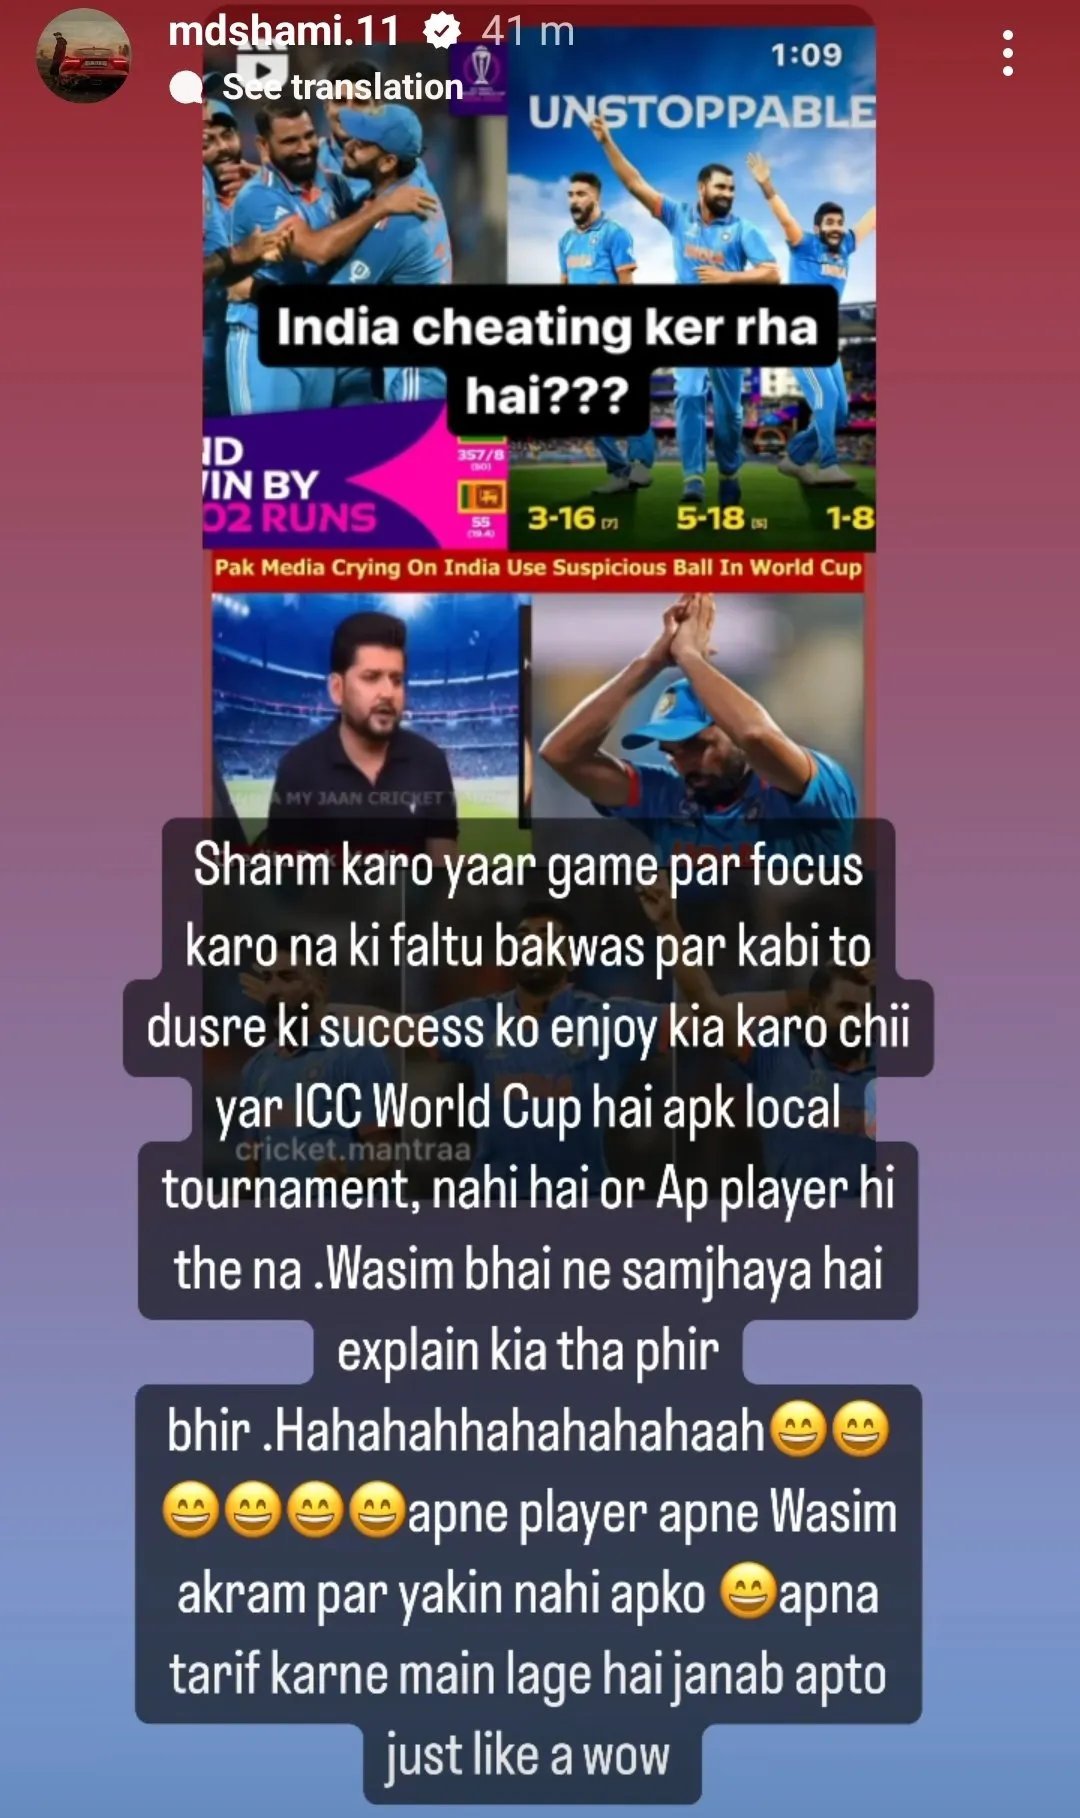 Mohammed Shami’s epic response to Hasan Raza’s allegations